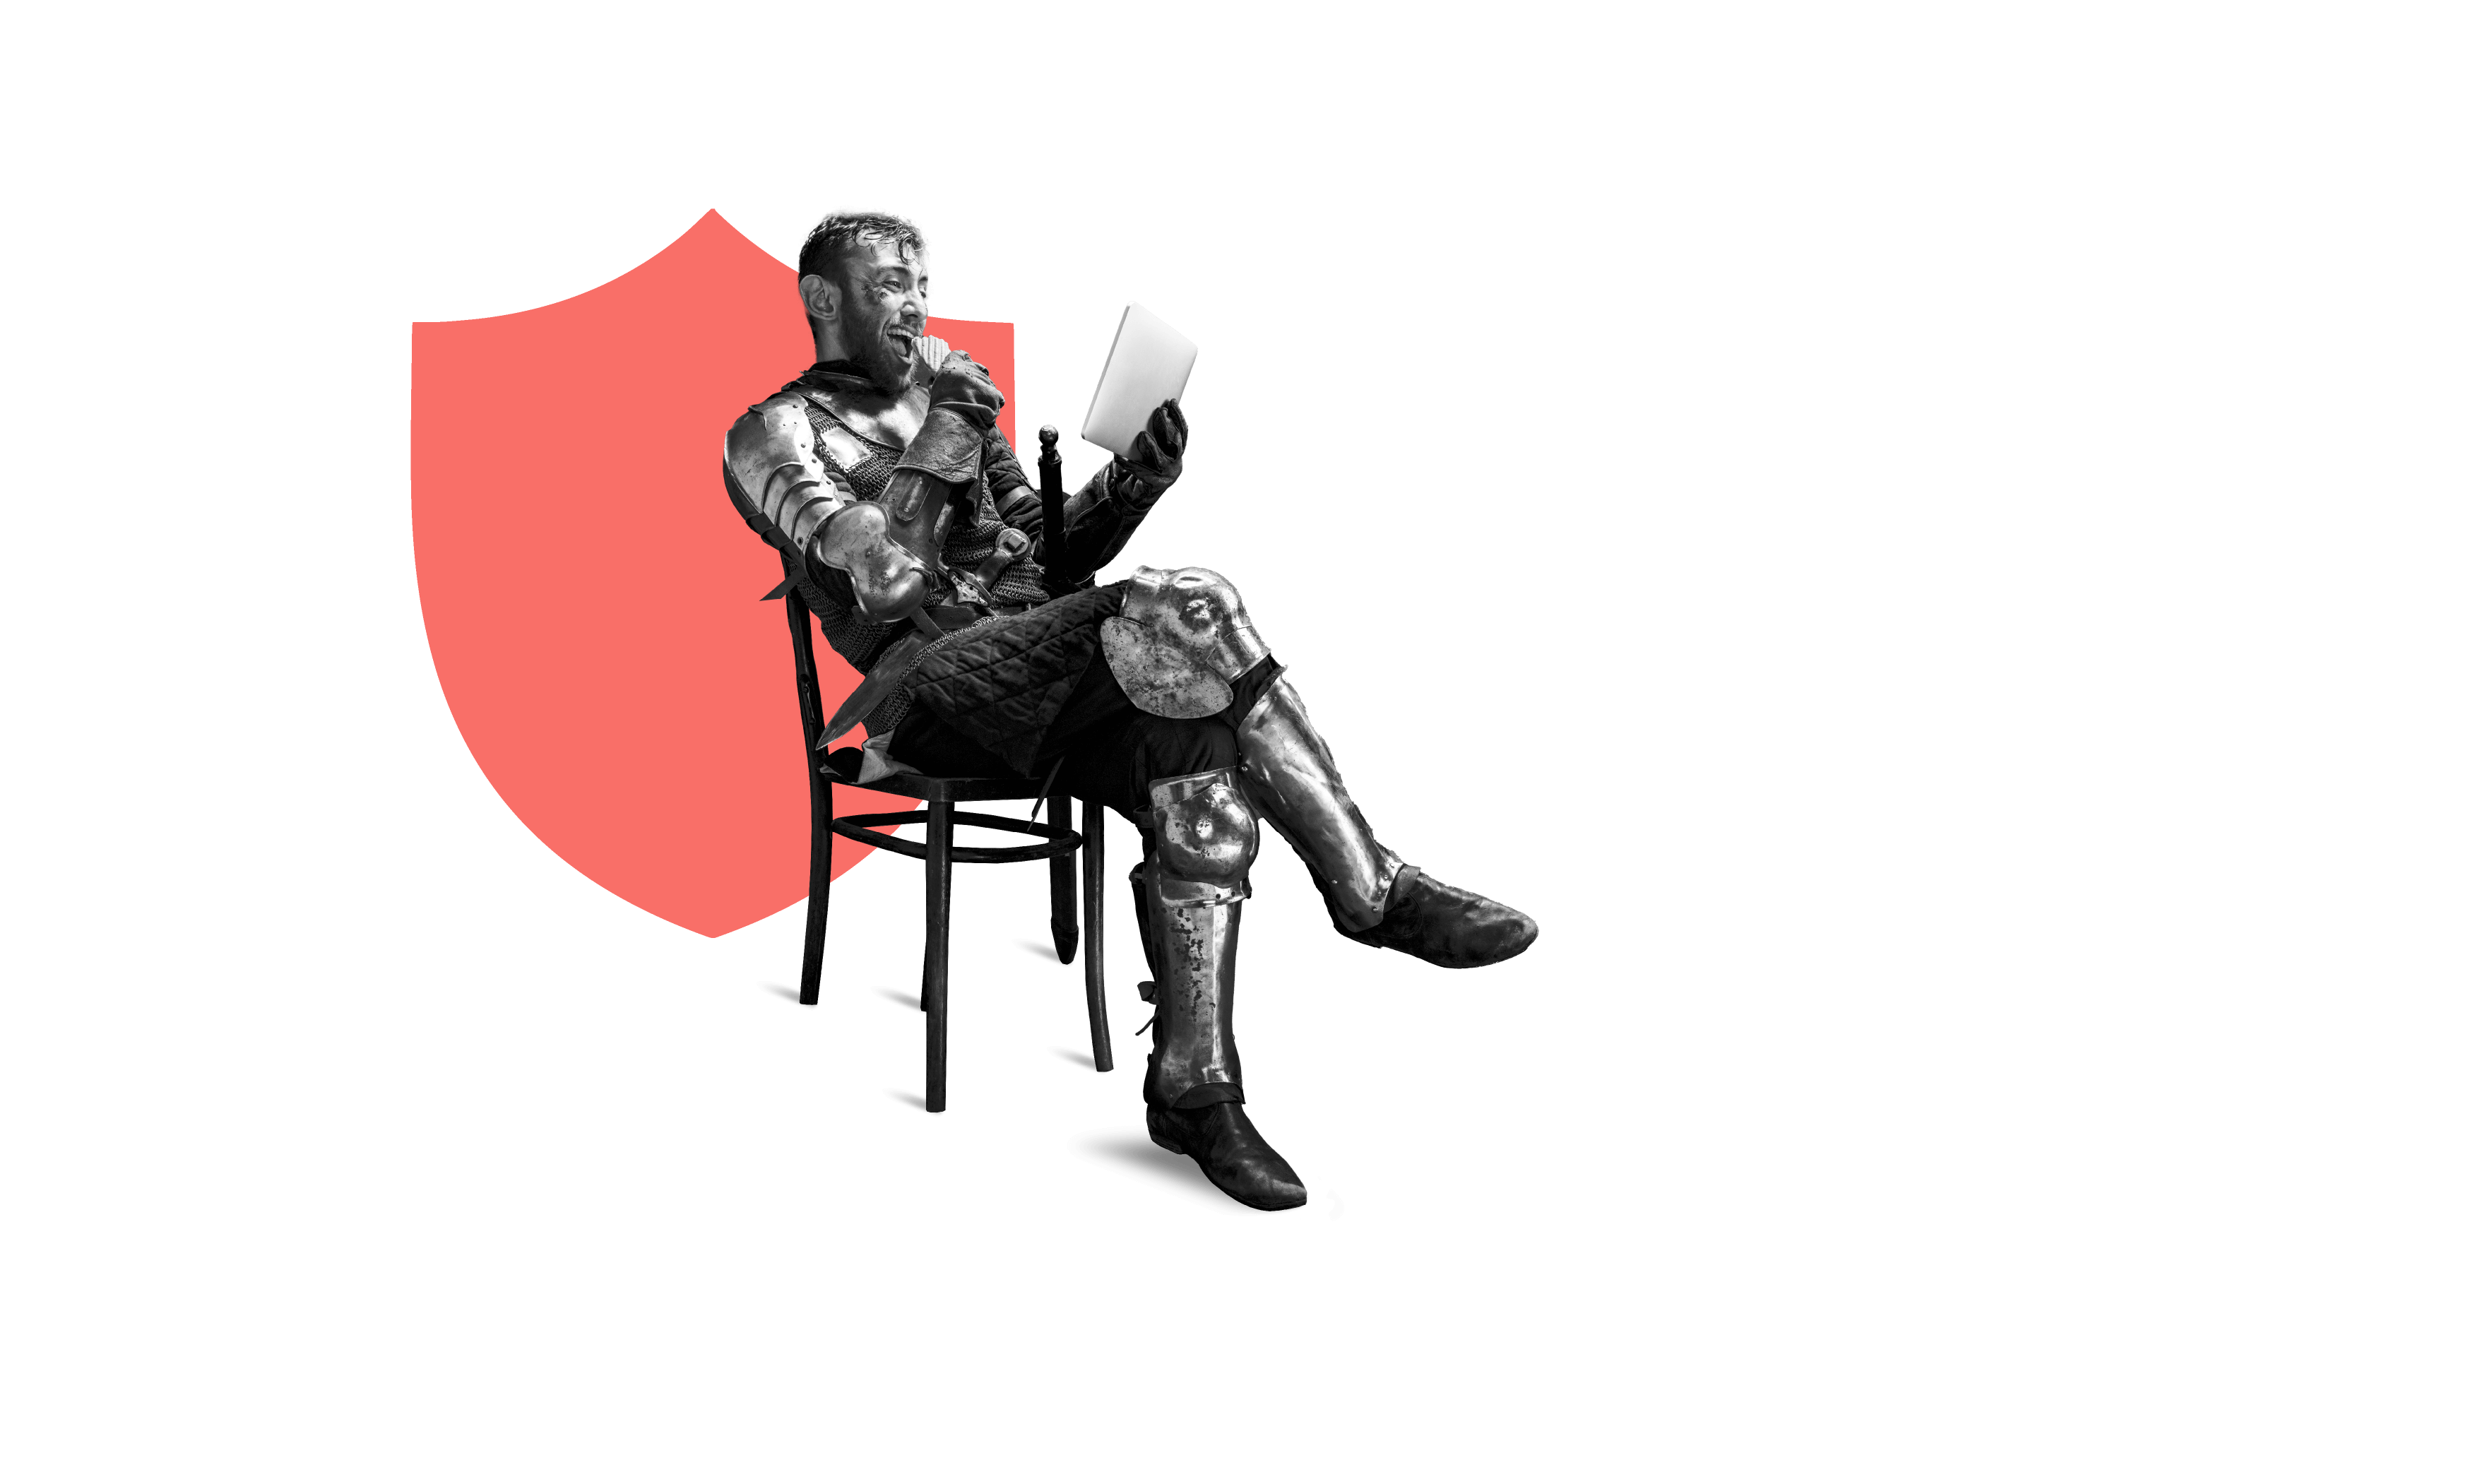 Man in armor sitting on chair with laptop on his lap